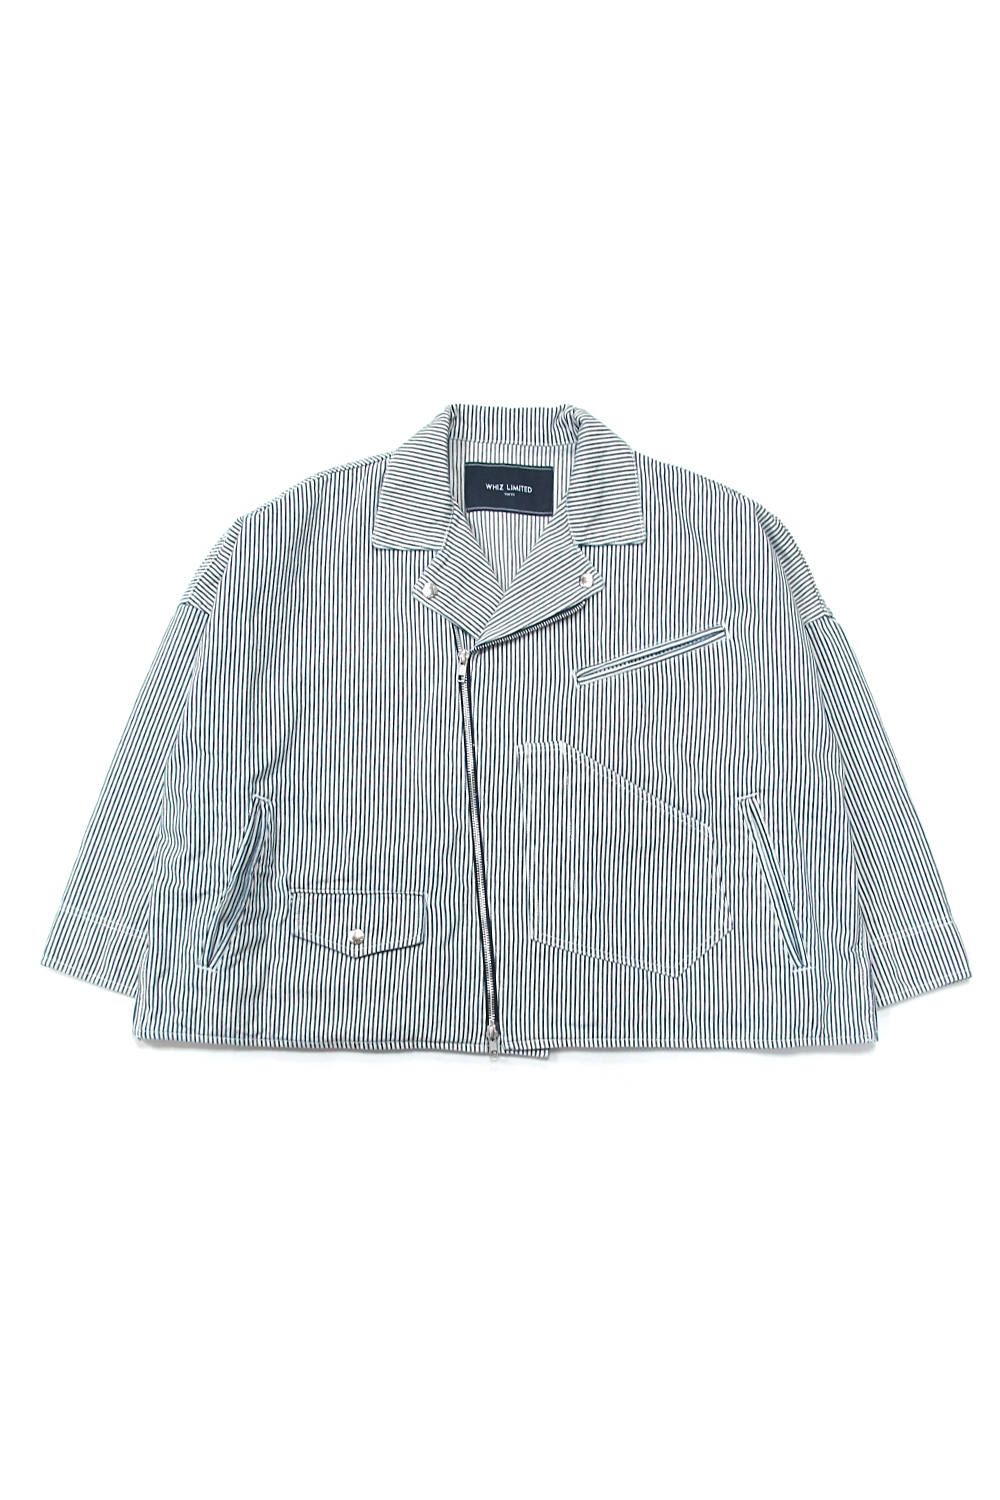 NEW ARRIVAL / WHIZ LIMITED-RIDERS JACKET | LOOPHOLE